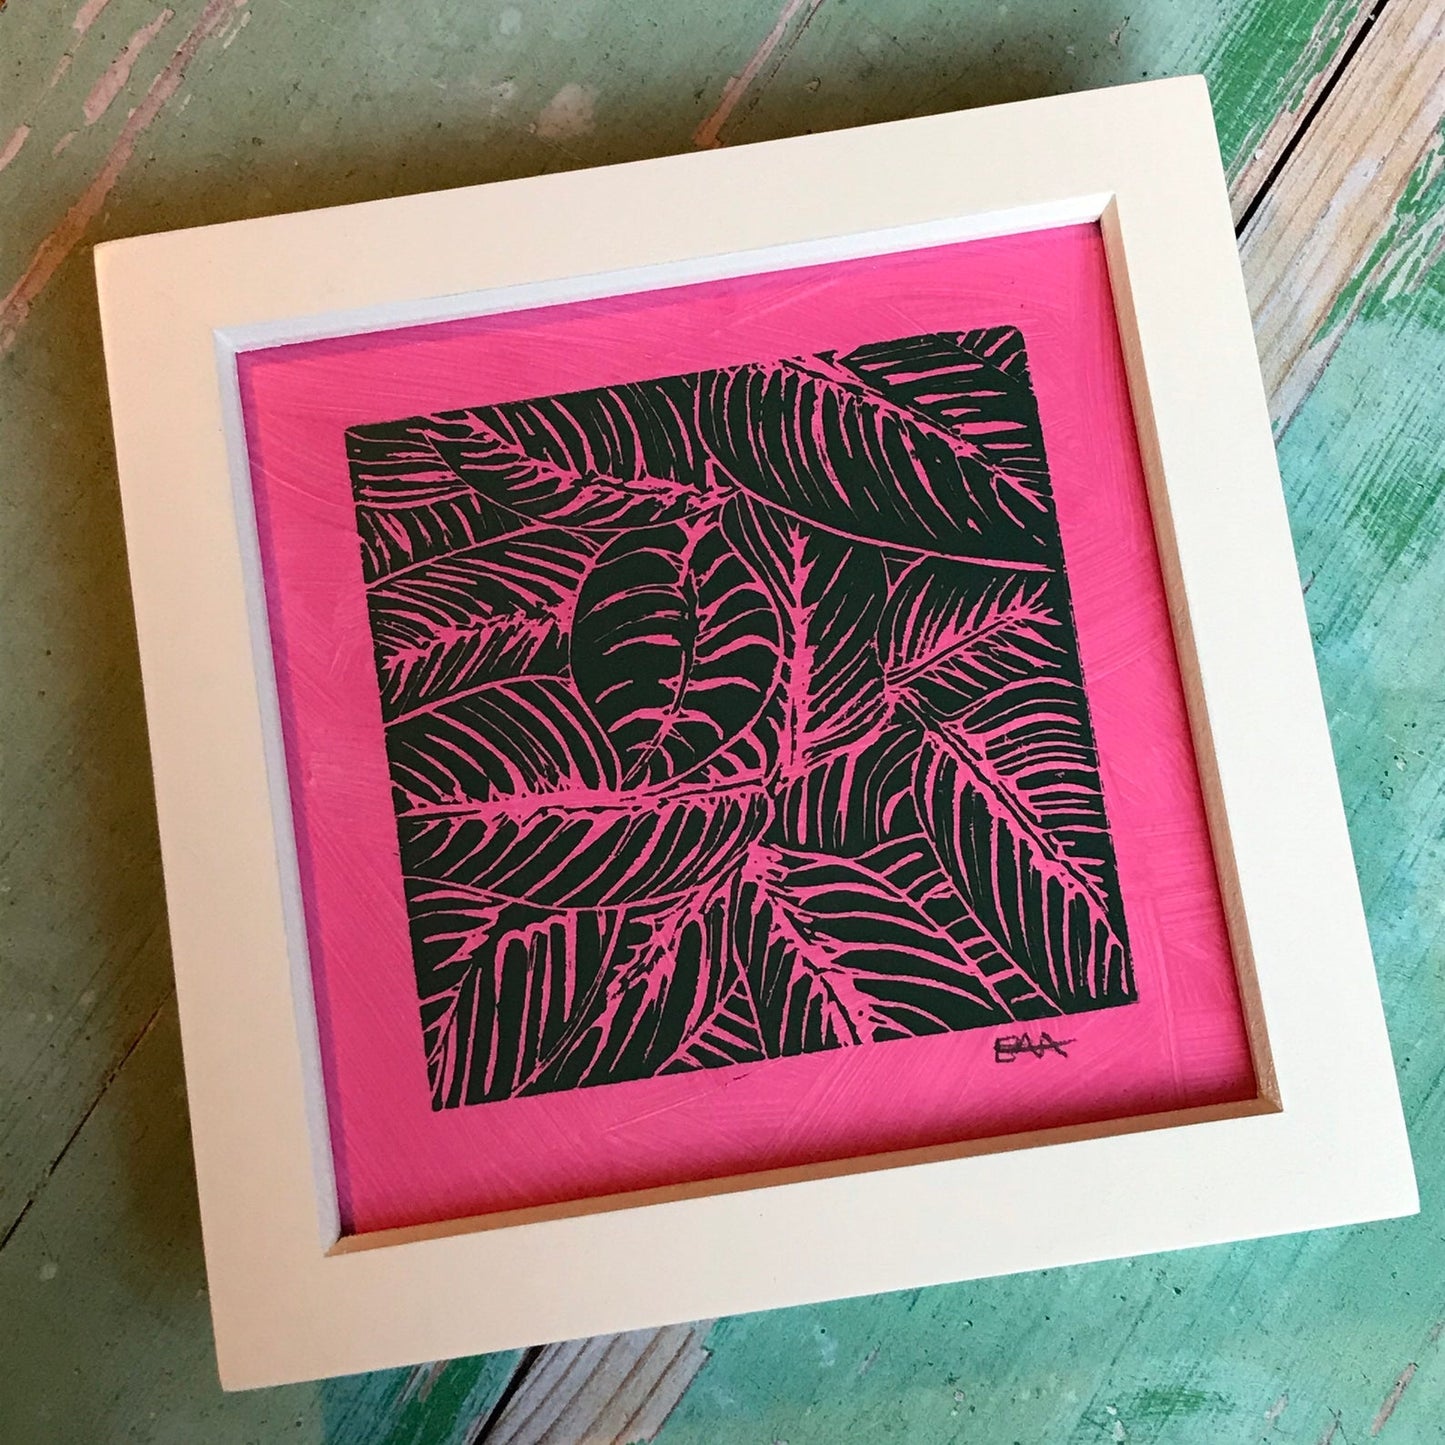 Trelawney Designs hand cut lino print with water based ink. Botanical leaves in Bottle green on a dark pink background.